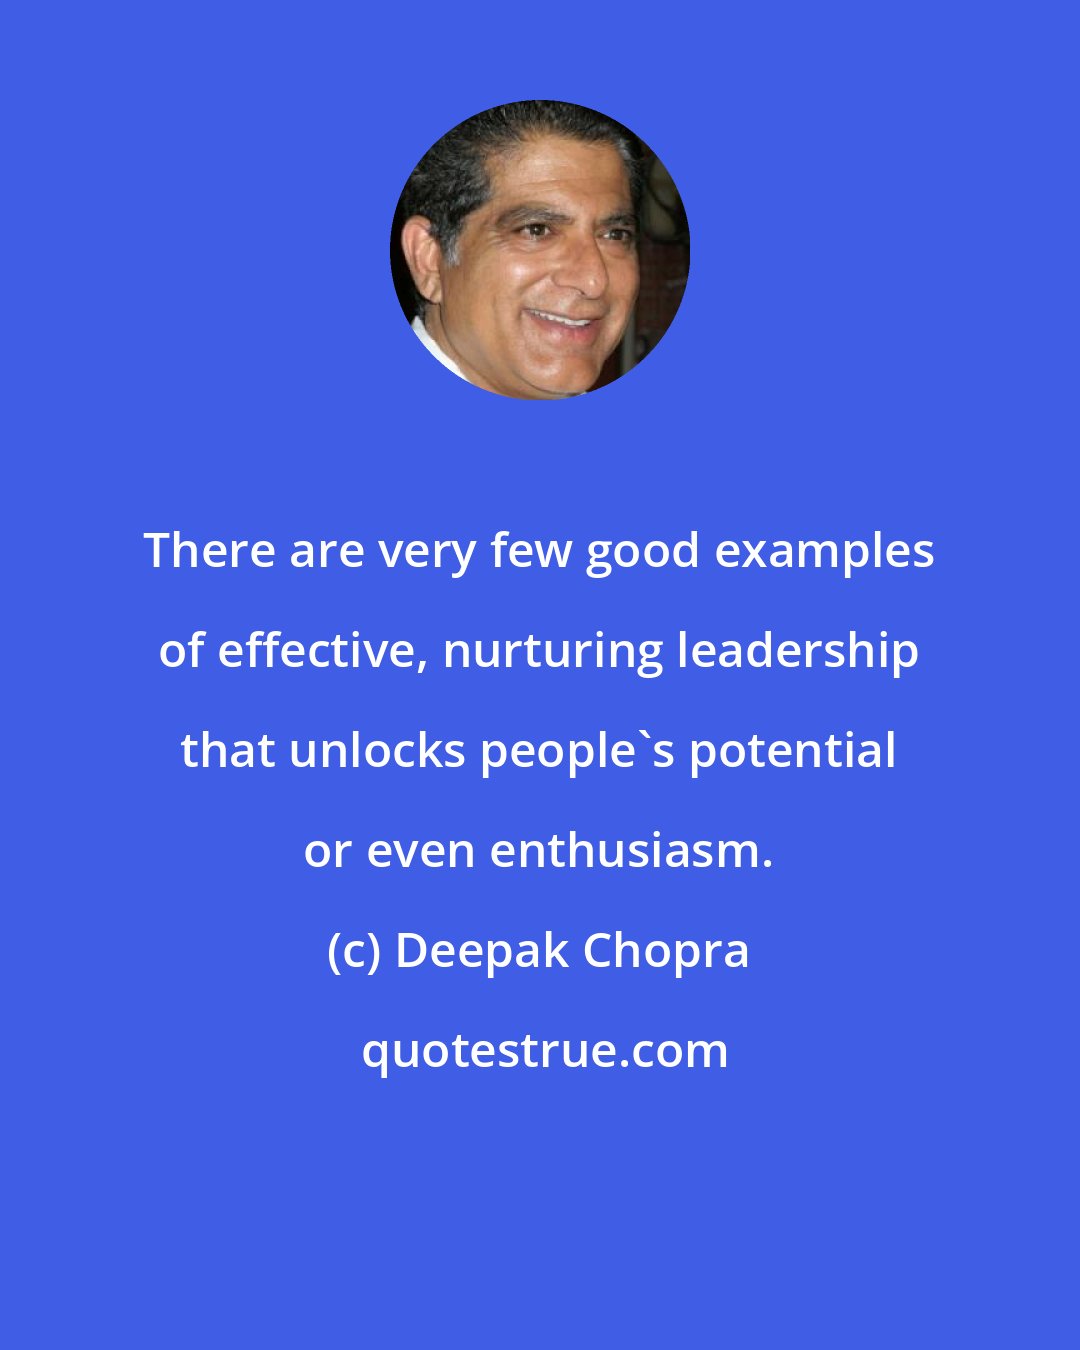 Deepak Chopra: There are very few good examples of effective, nurturing leadership that unlocks people's potential or even enthusiasm.